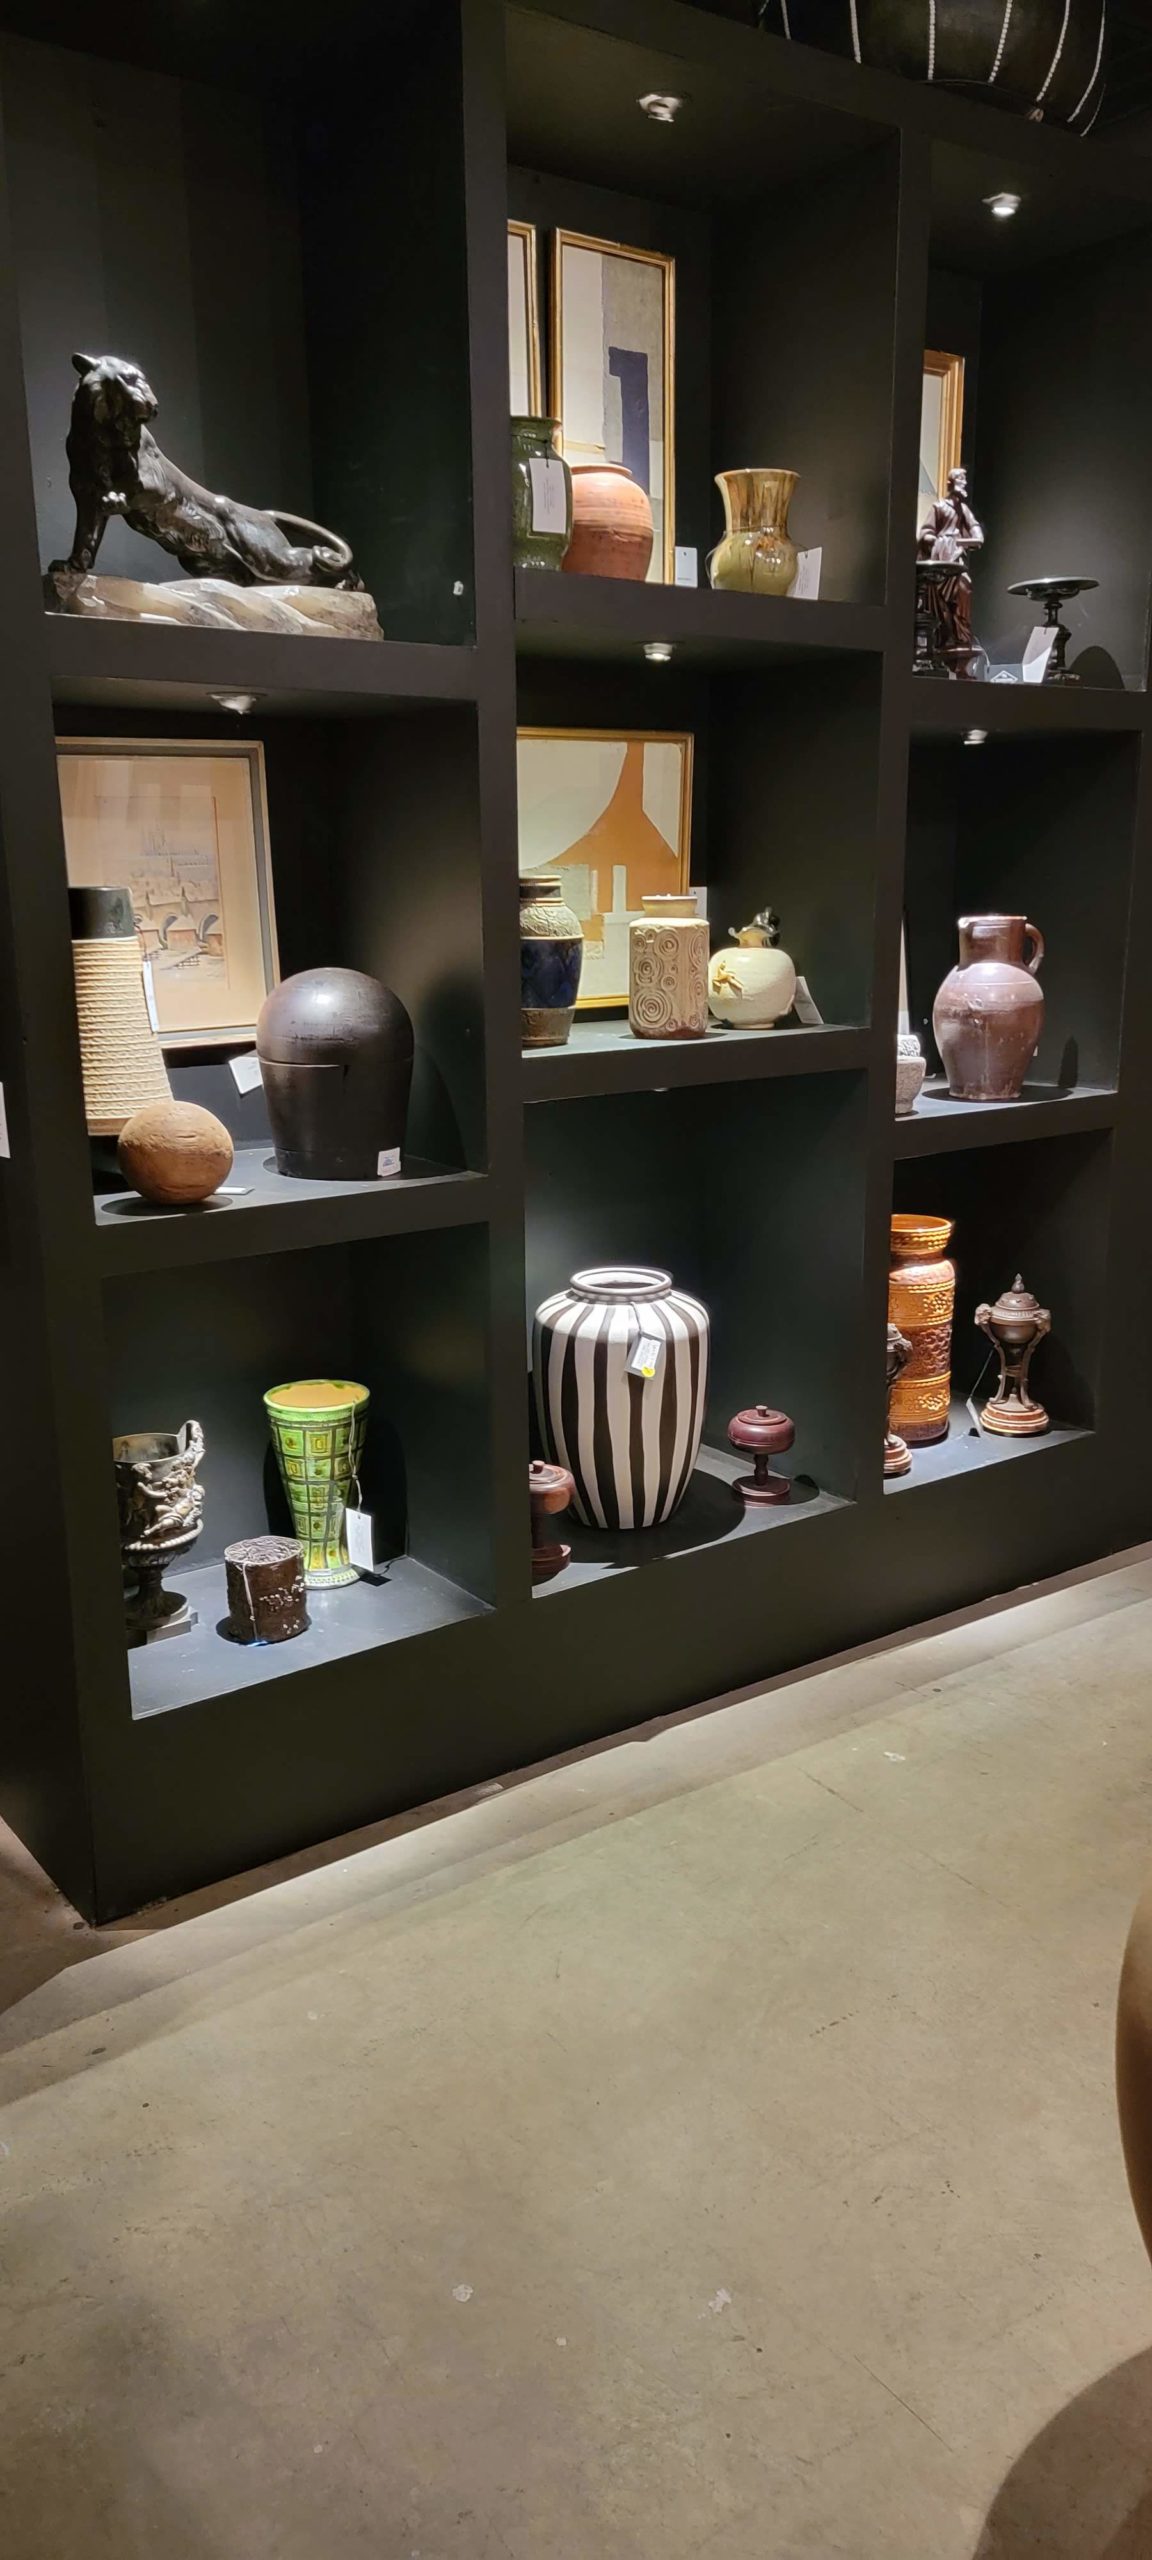 image of vases and decorative objects in shelf